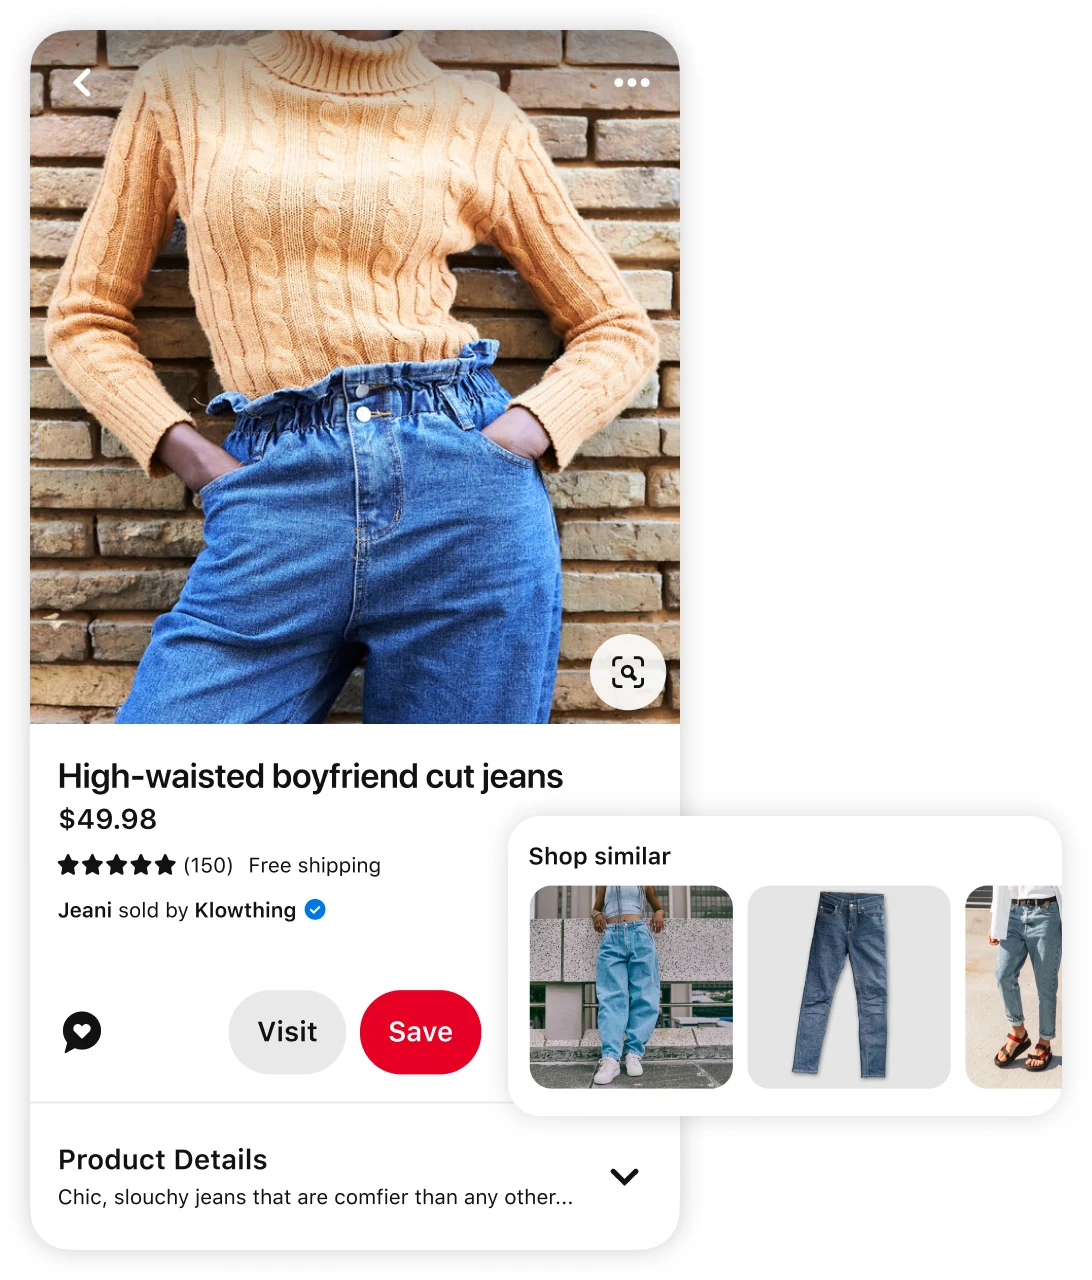 Pin of a woman wearing an orange cable knit sweater and high-waisted boyfriend jeans with suggested similar products and a prompt to "shop similar"